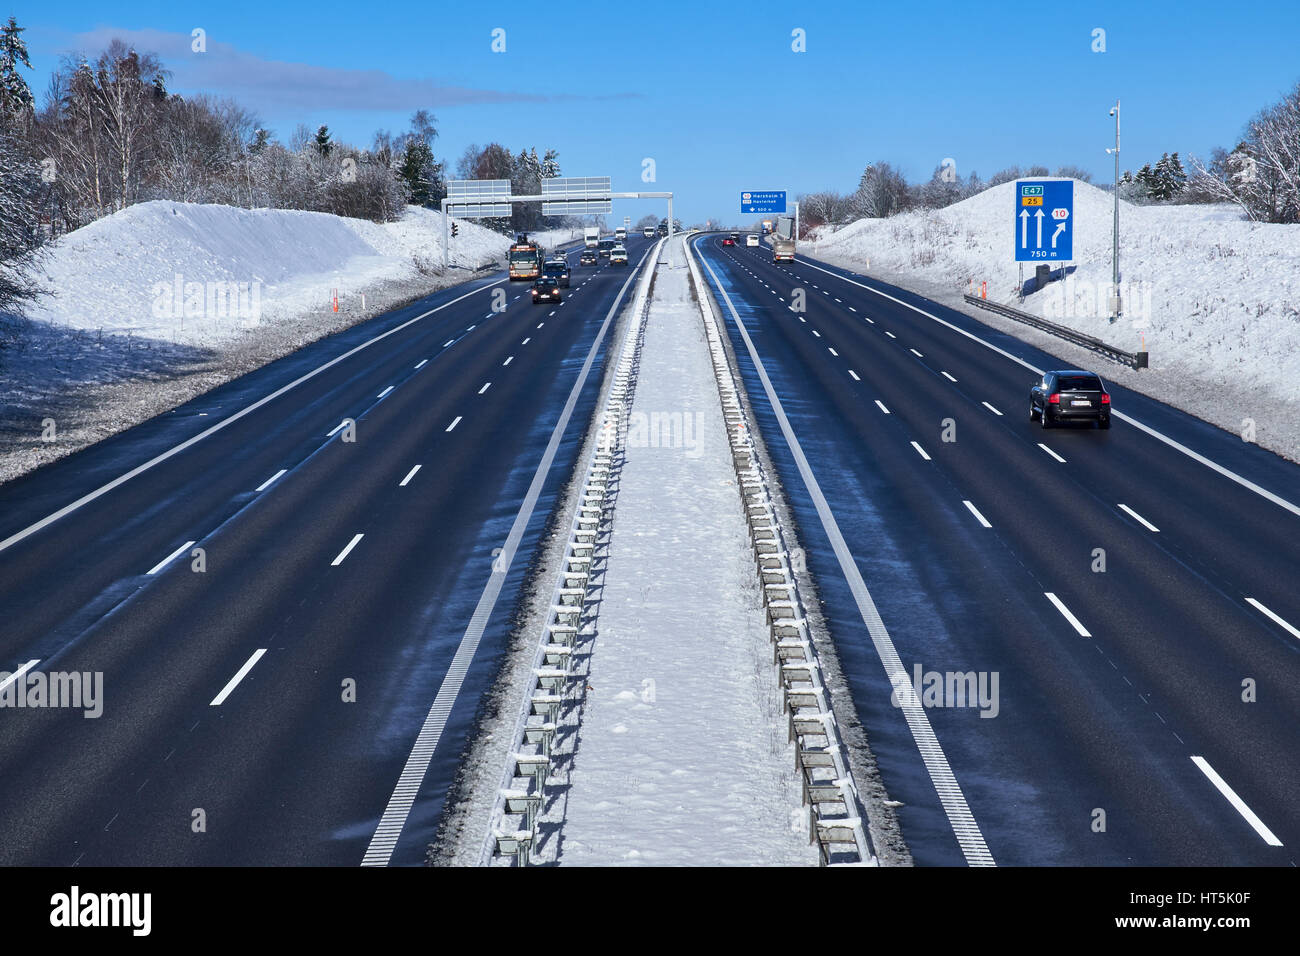 HOERSHOLM, DENMARK - FEBRUARY 24, 2017: Highway with six lanes cleared of snow in a winter landscape Stock Photo